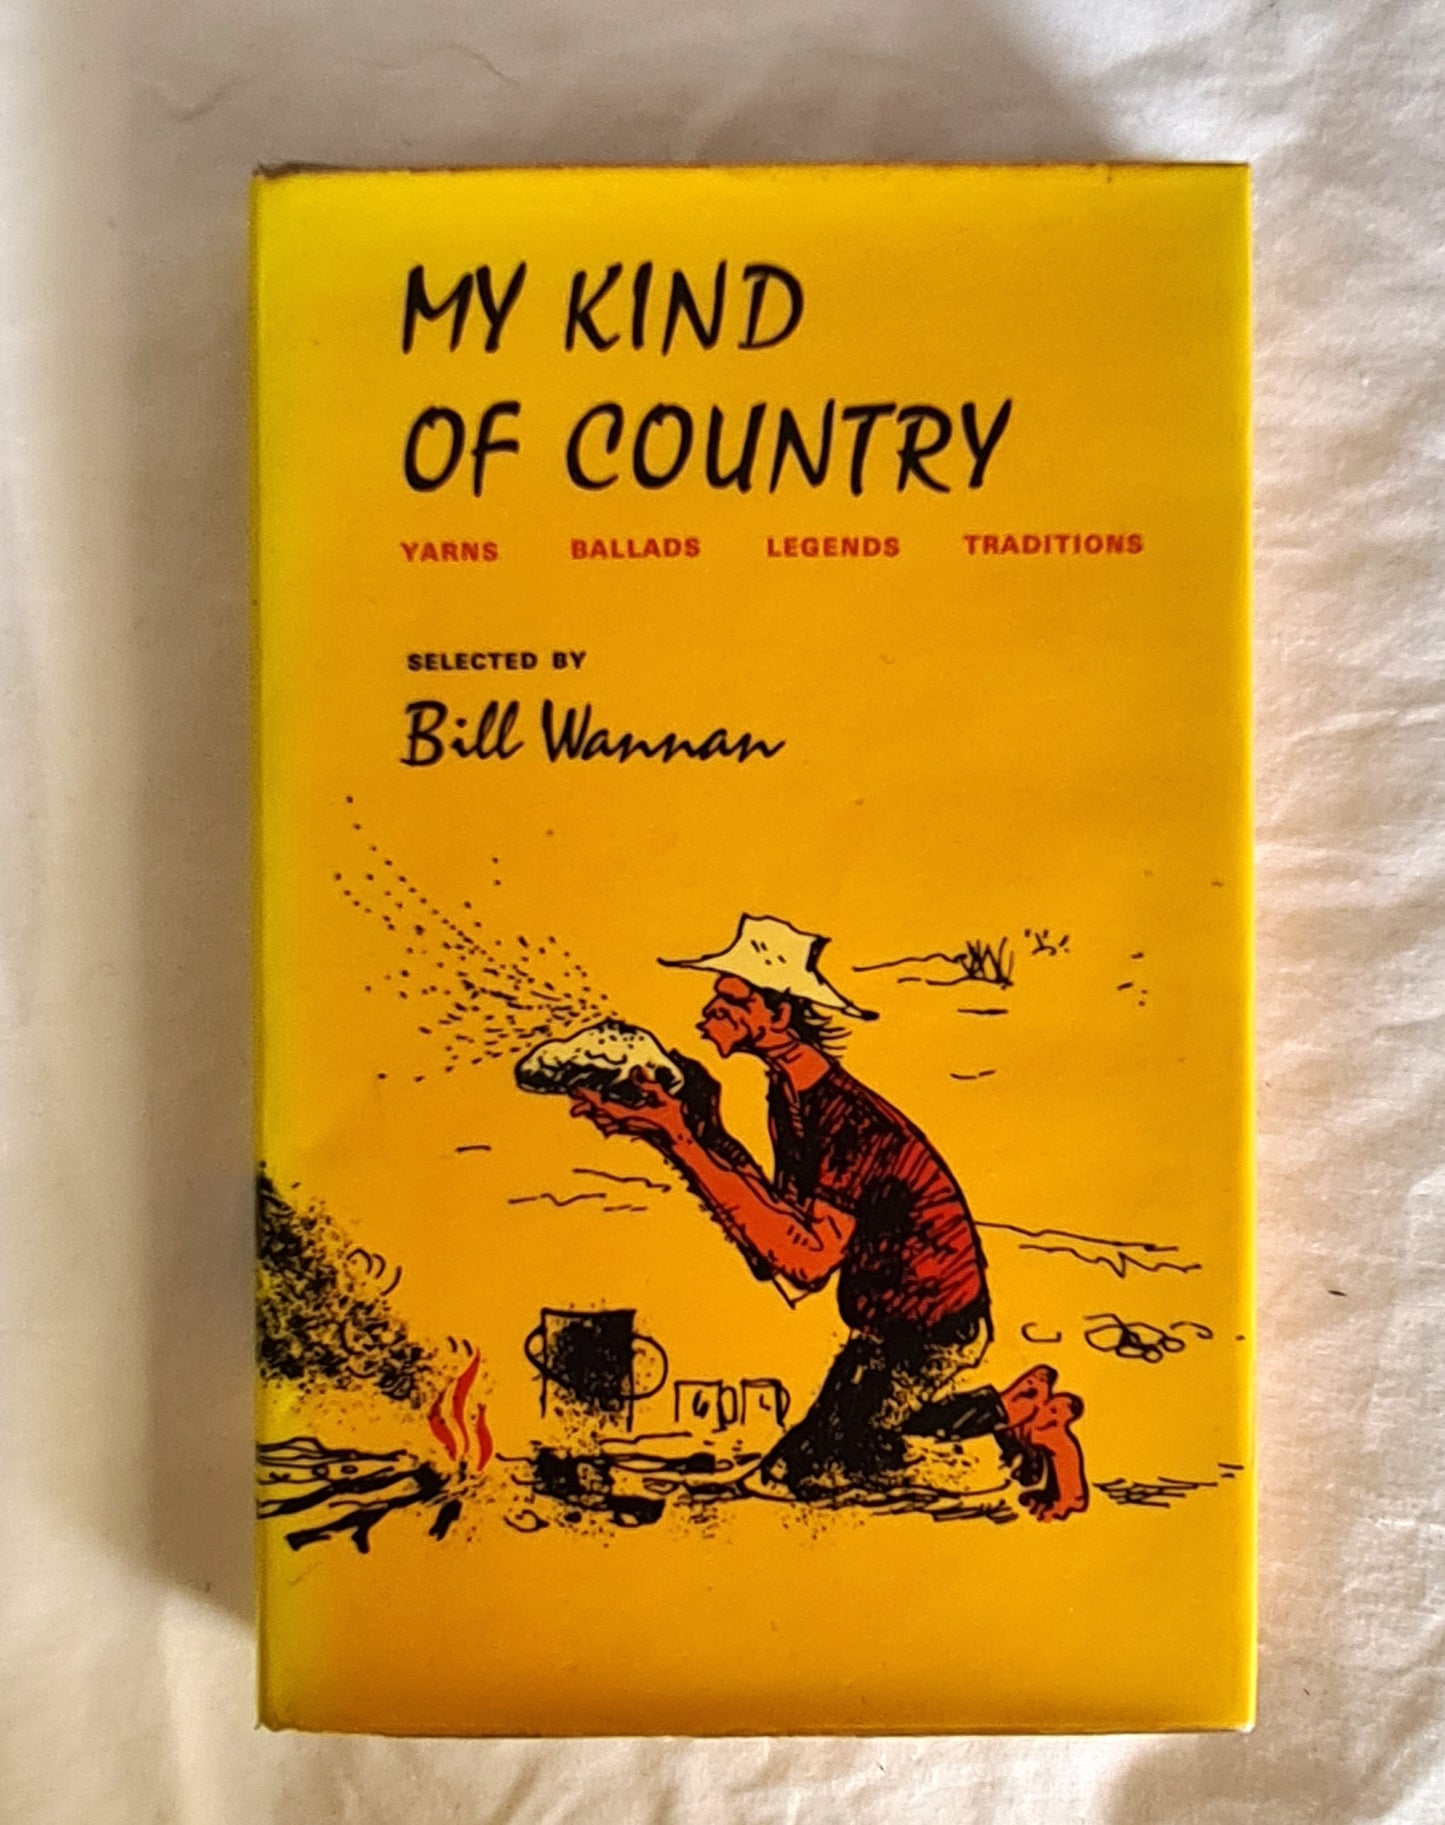 My Kind of Country  Yarns Ballads Legends Traditions  by Bill Wannan  Illustrated by R. G. Edwards